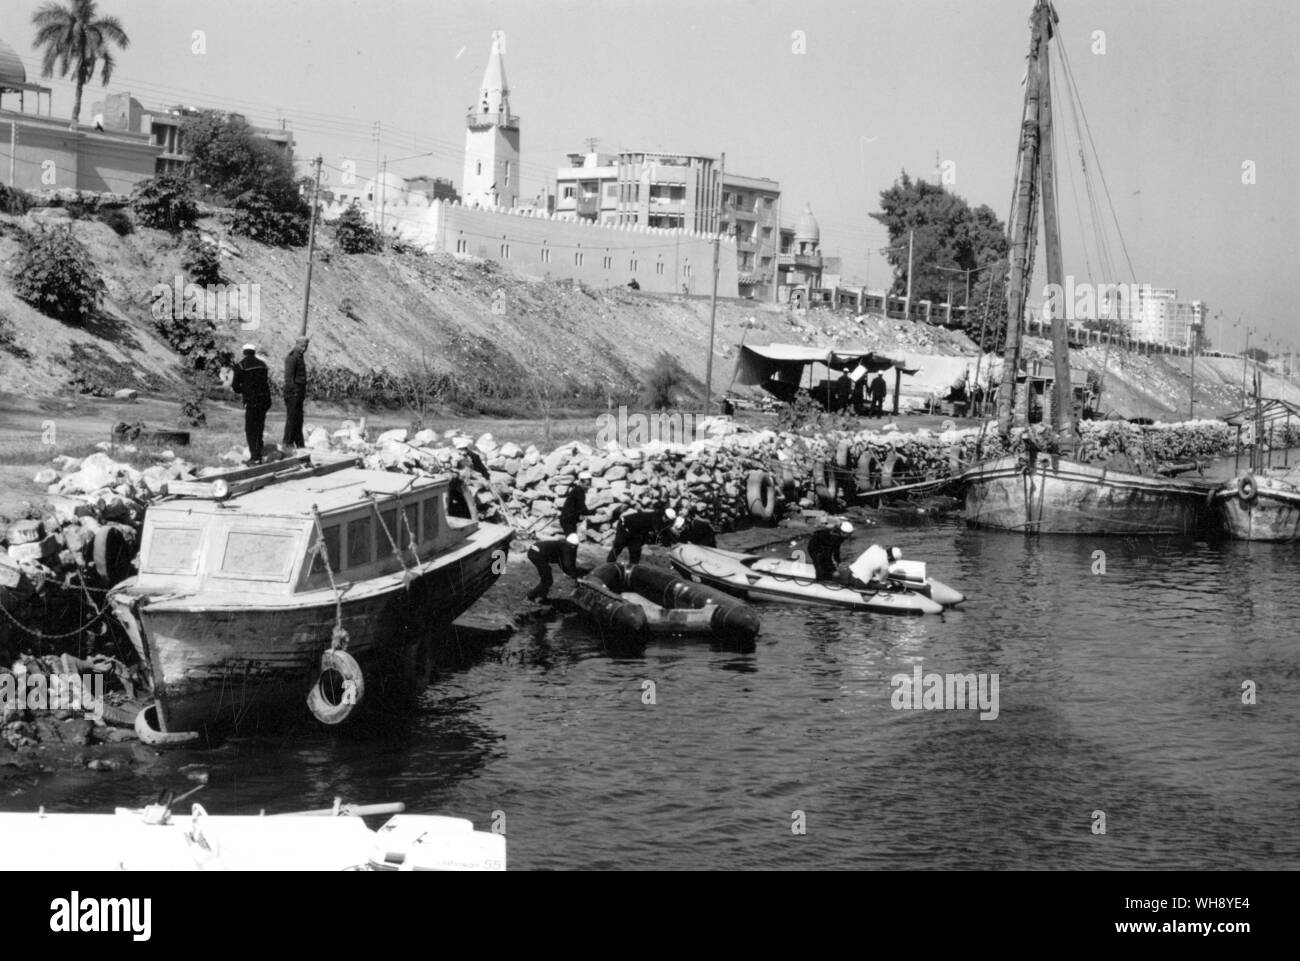 River Police Station. 'The place was on the slope of the levee with two shacks, some ramshackle boats and dozen young men who were dressed in seamen's uniforms which were ragged and dirty'. Egypt. Stock Photo